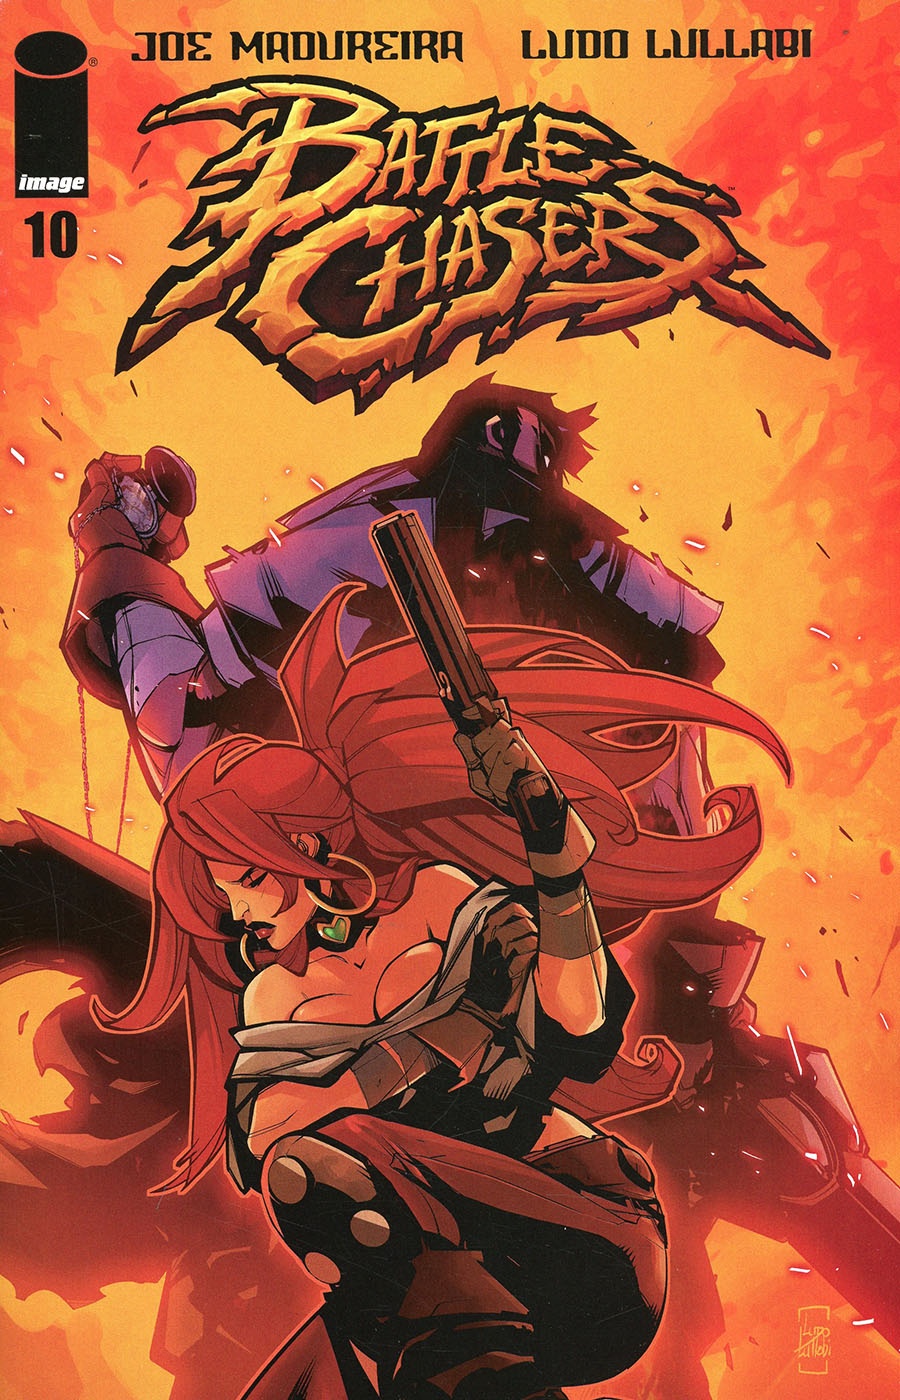 Battle Chasers #10 Cover A Regular Ludo Lullabi Cover